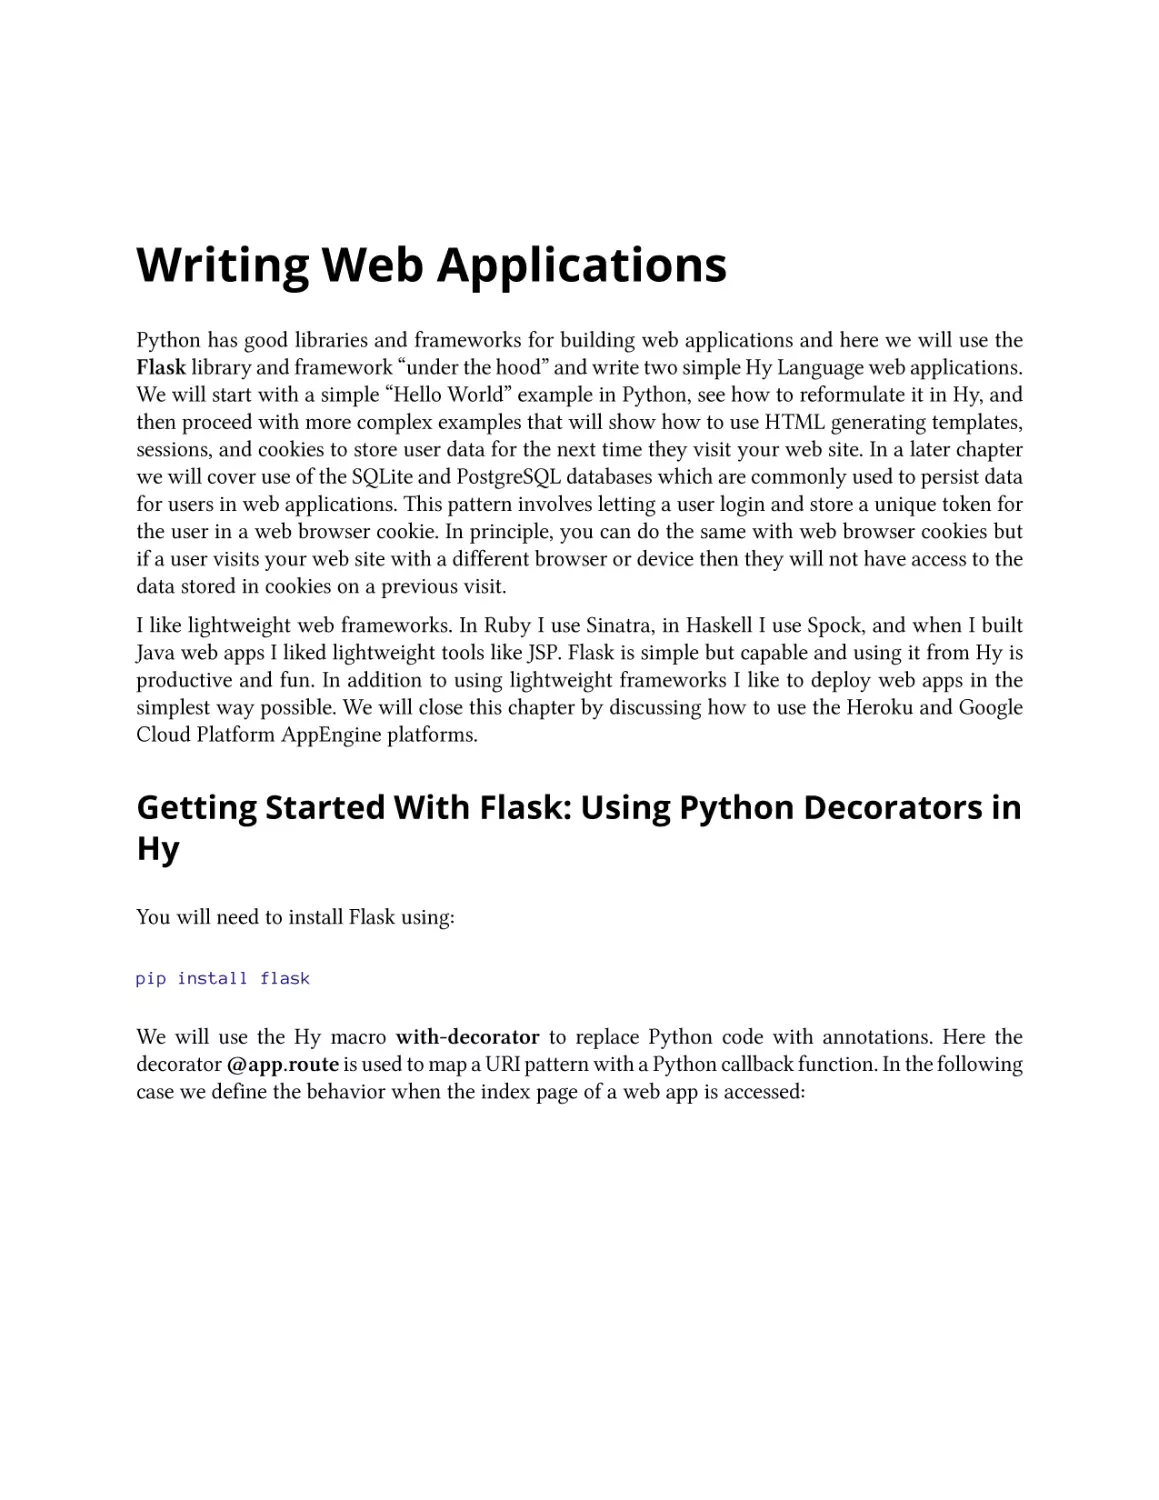 Writing Web Applications
Getting Started With Flask